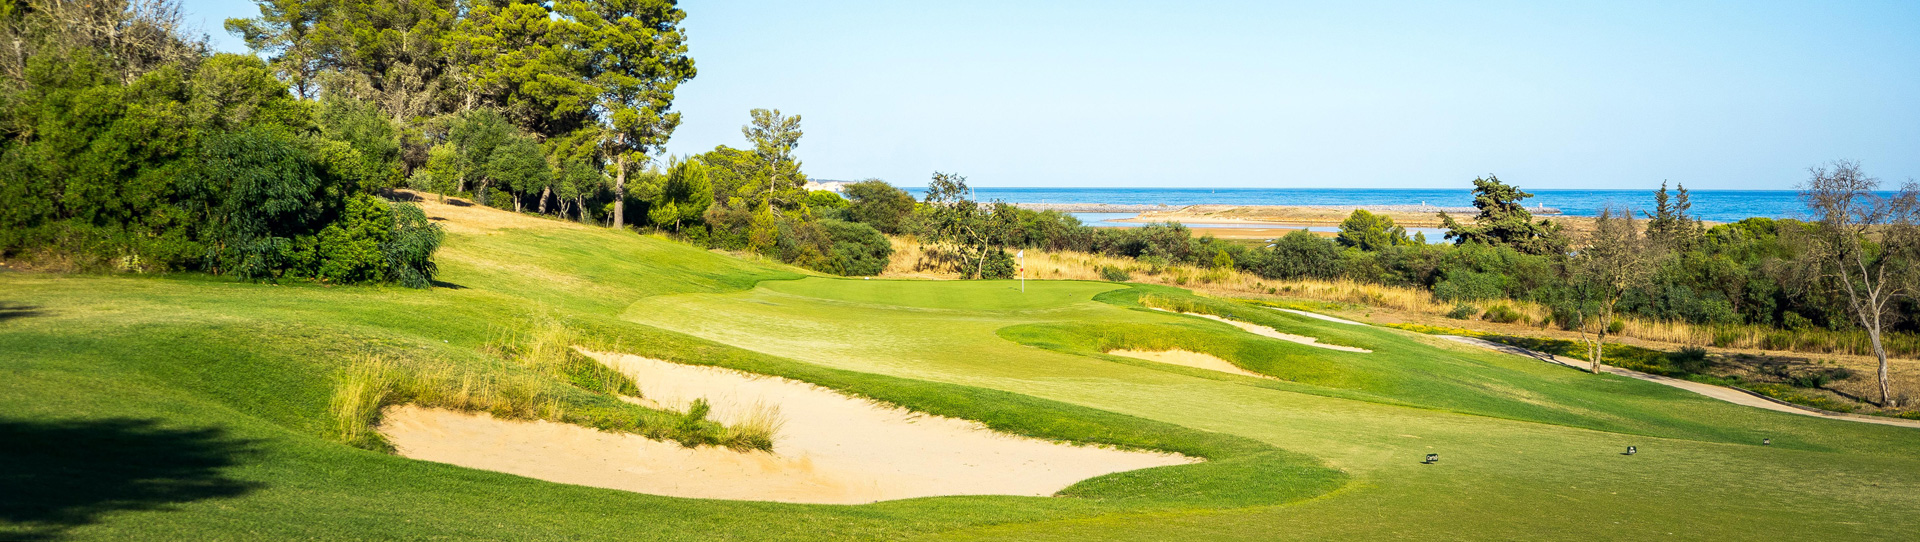 Portugal golf holidays - Palmares Duo Experience - Photo 1